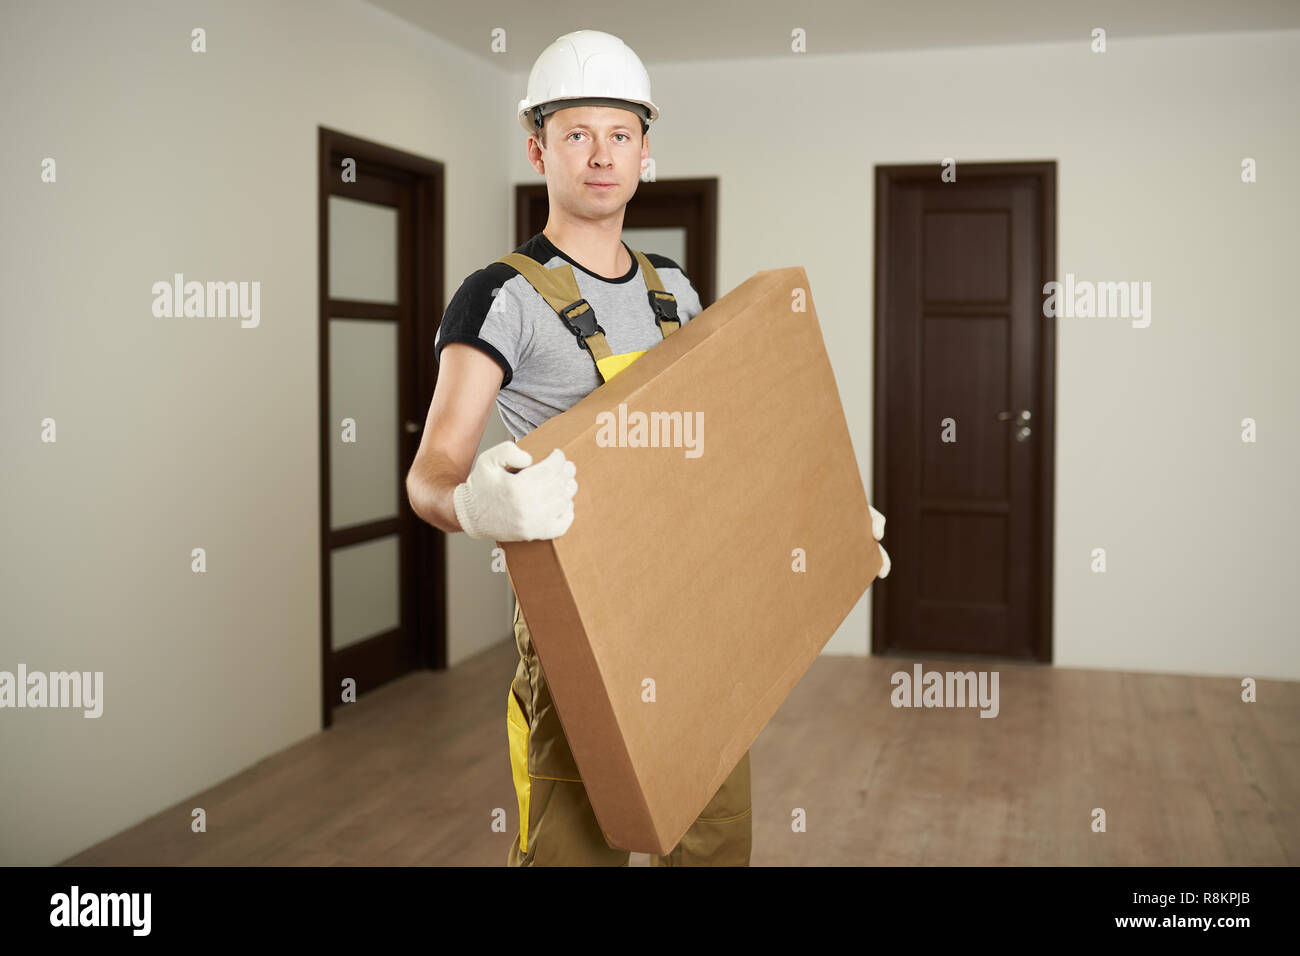 Man carry box. Worker hold package furniture box in house background Stock Photo